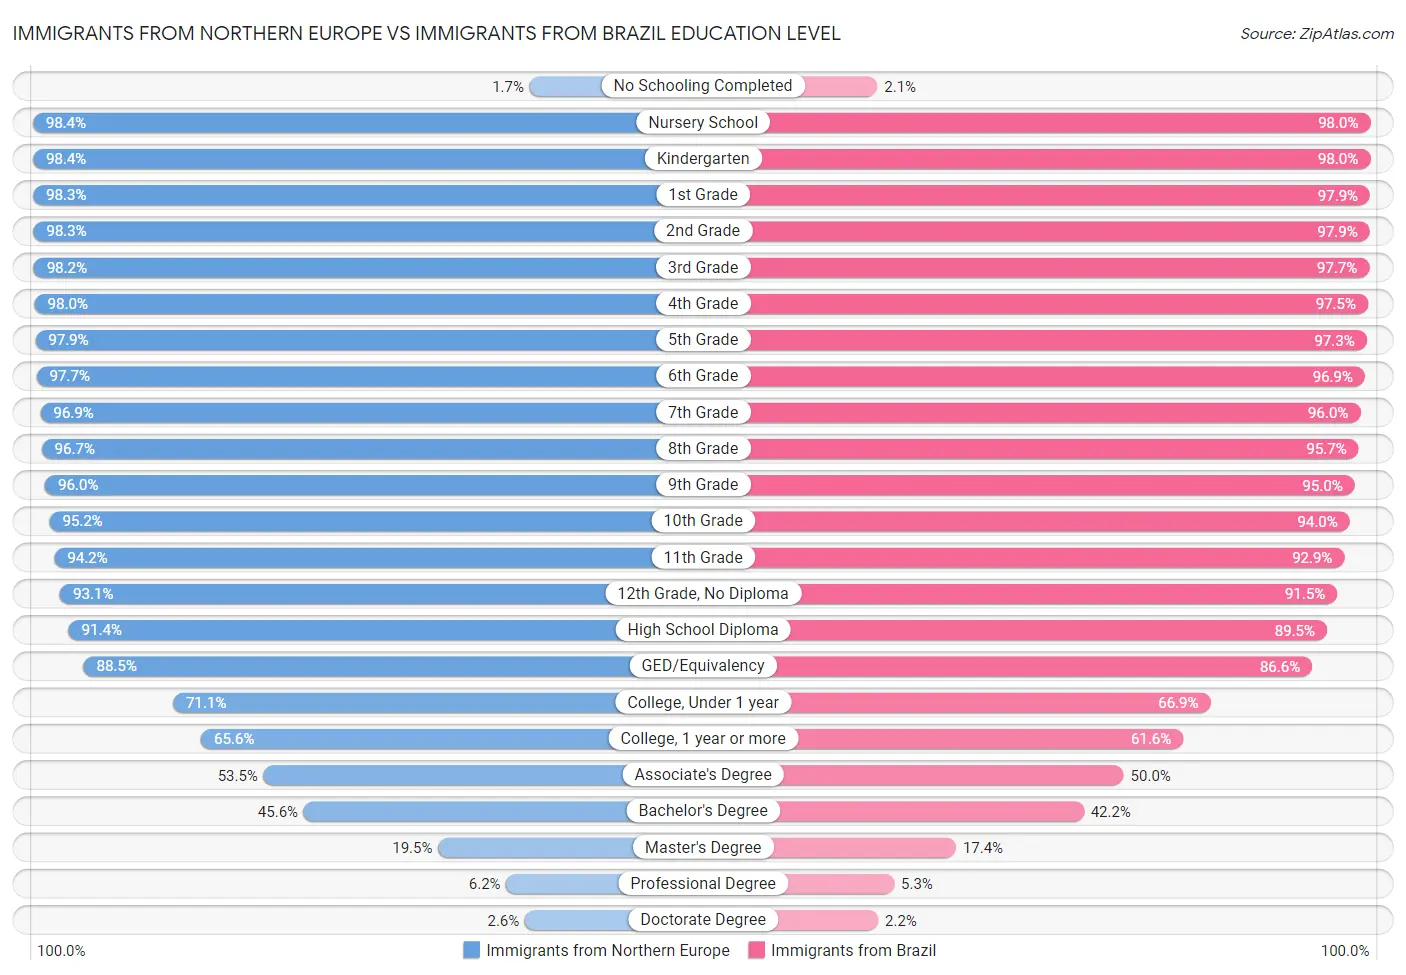 Immigrants from Northern Europe vs Immigrants from Brazil Education Level